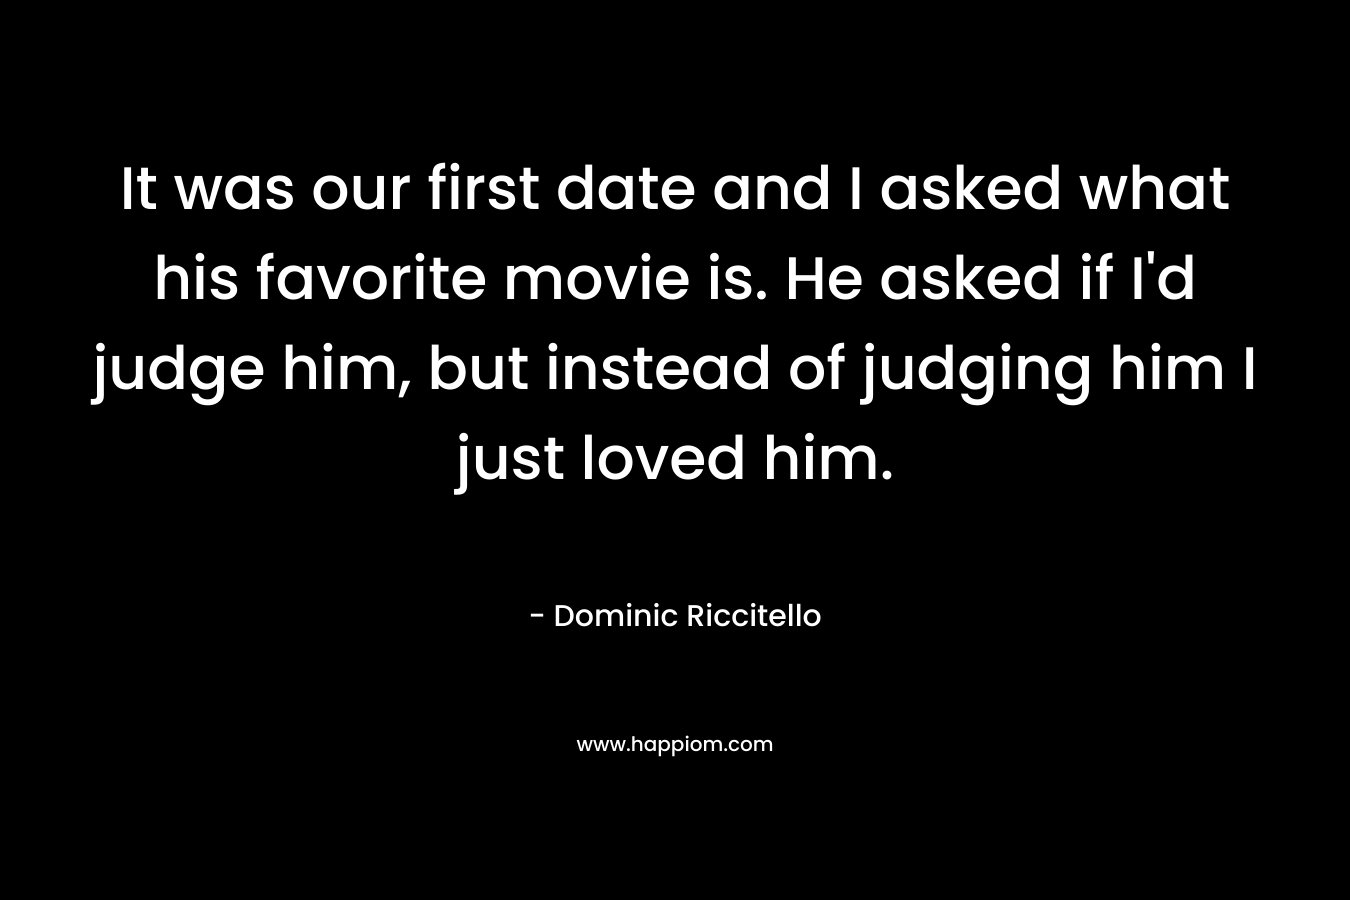 It was our first date and I asked what his favorite movie is. He asked if I'd judge him, but instead of judging him I just loved him.